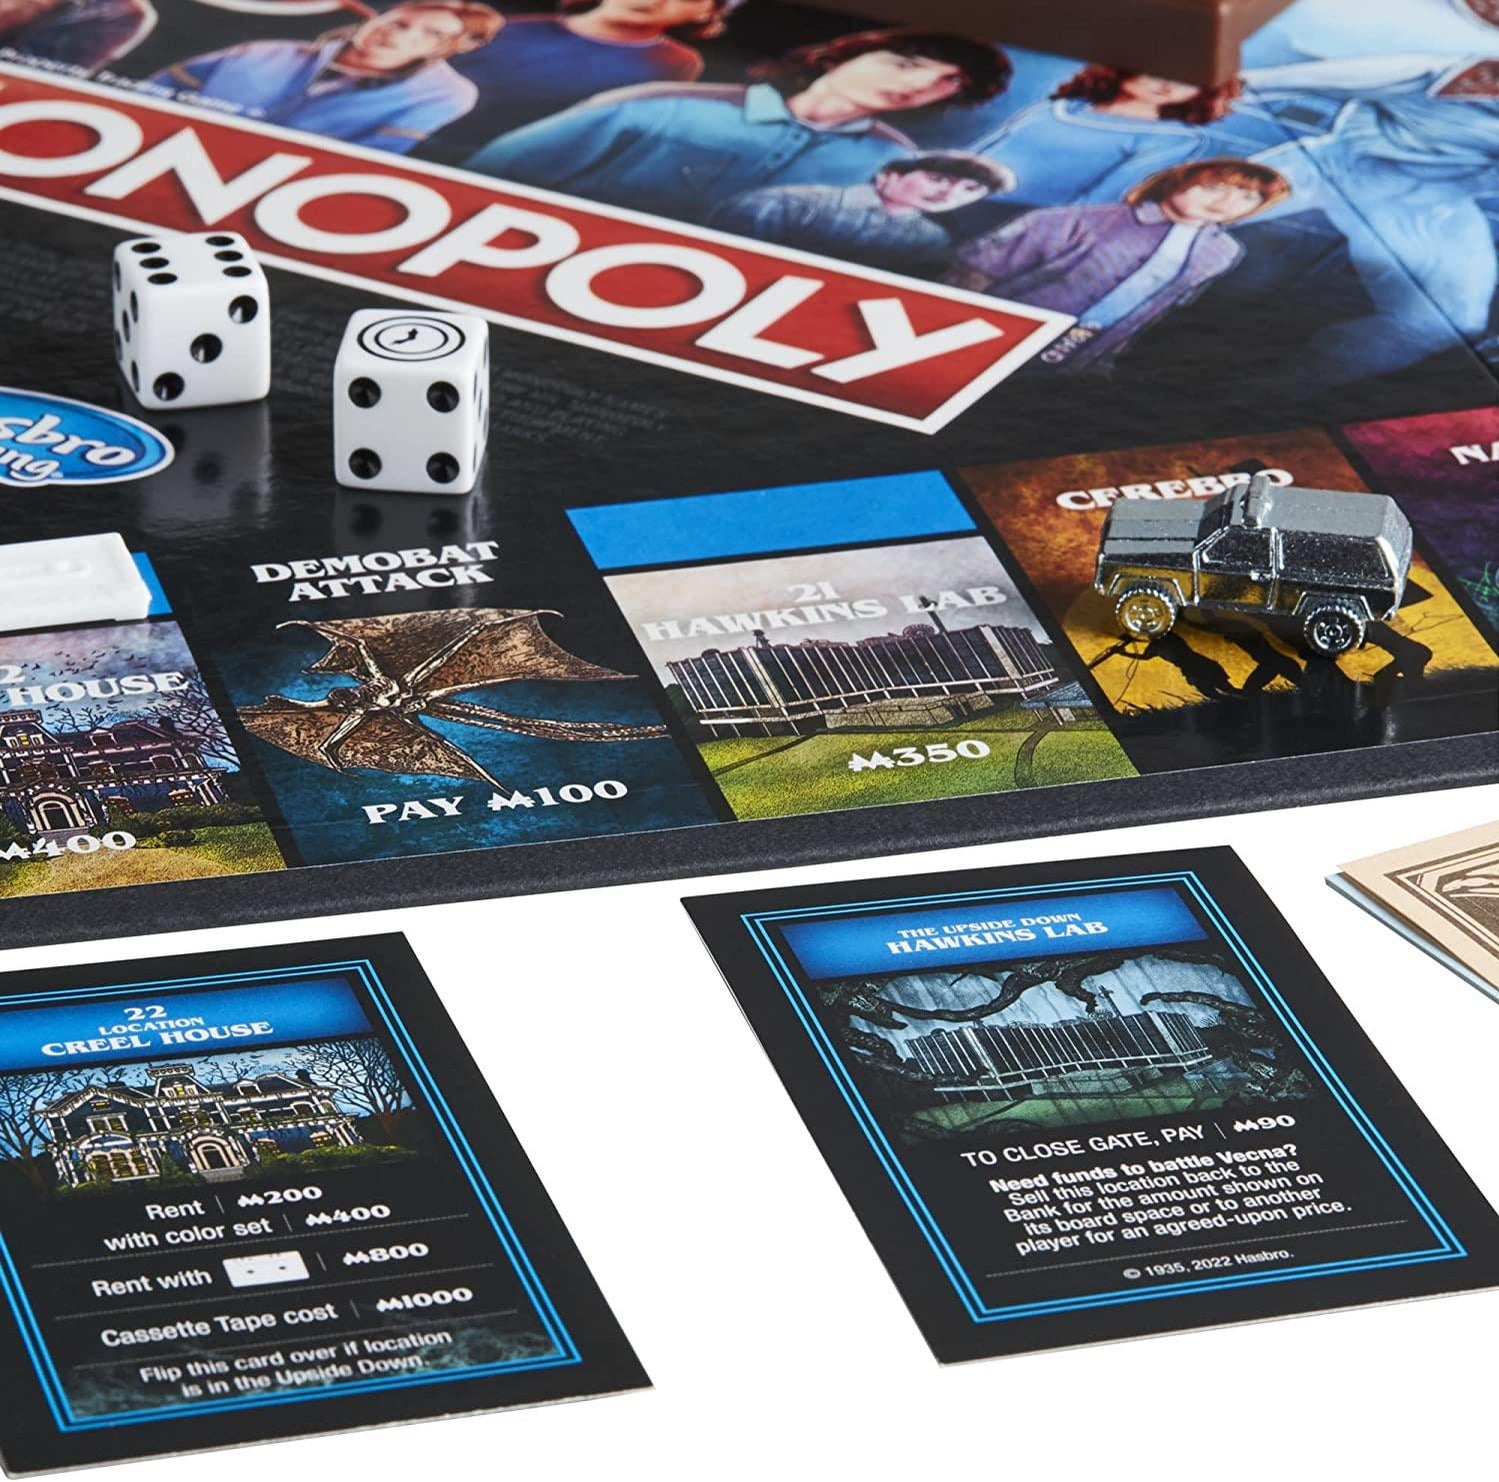 Controversial Stranger Things Season 4 Monopoly Game Is On Sale Now